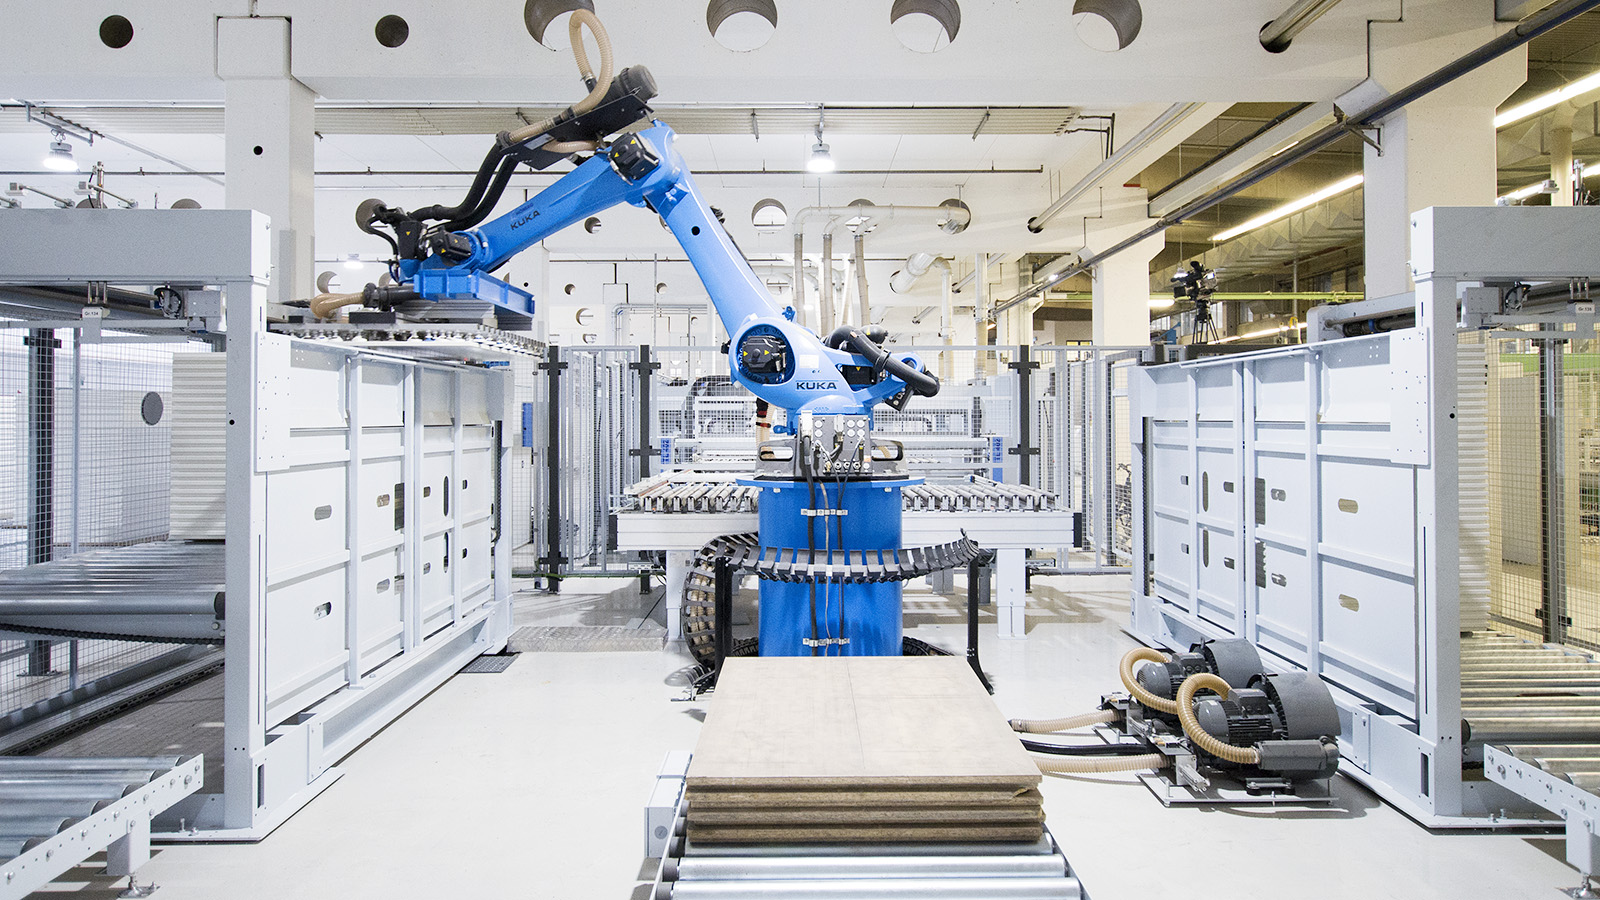 Precise, safe, and space saving - drilling with the DRILLTEQ C-800 combined with robot handling from HOMAG